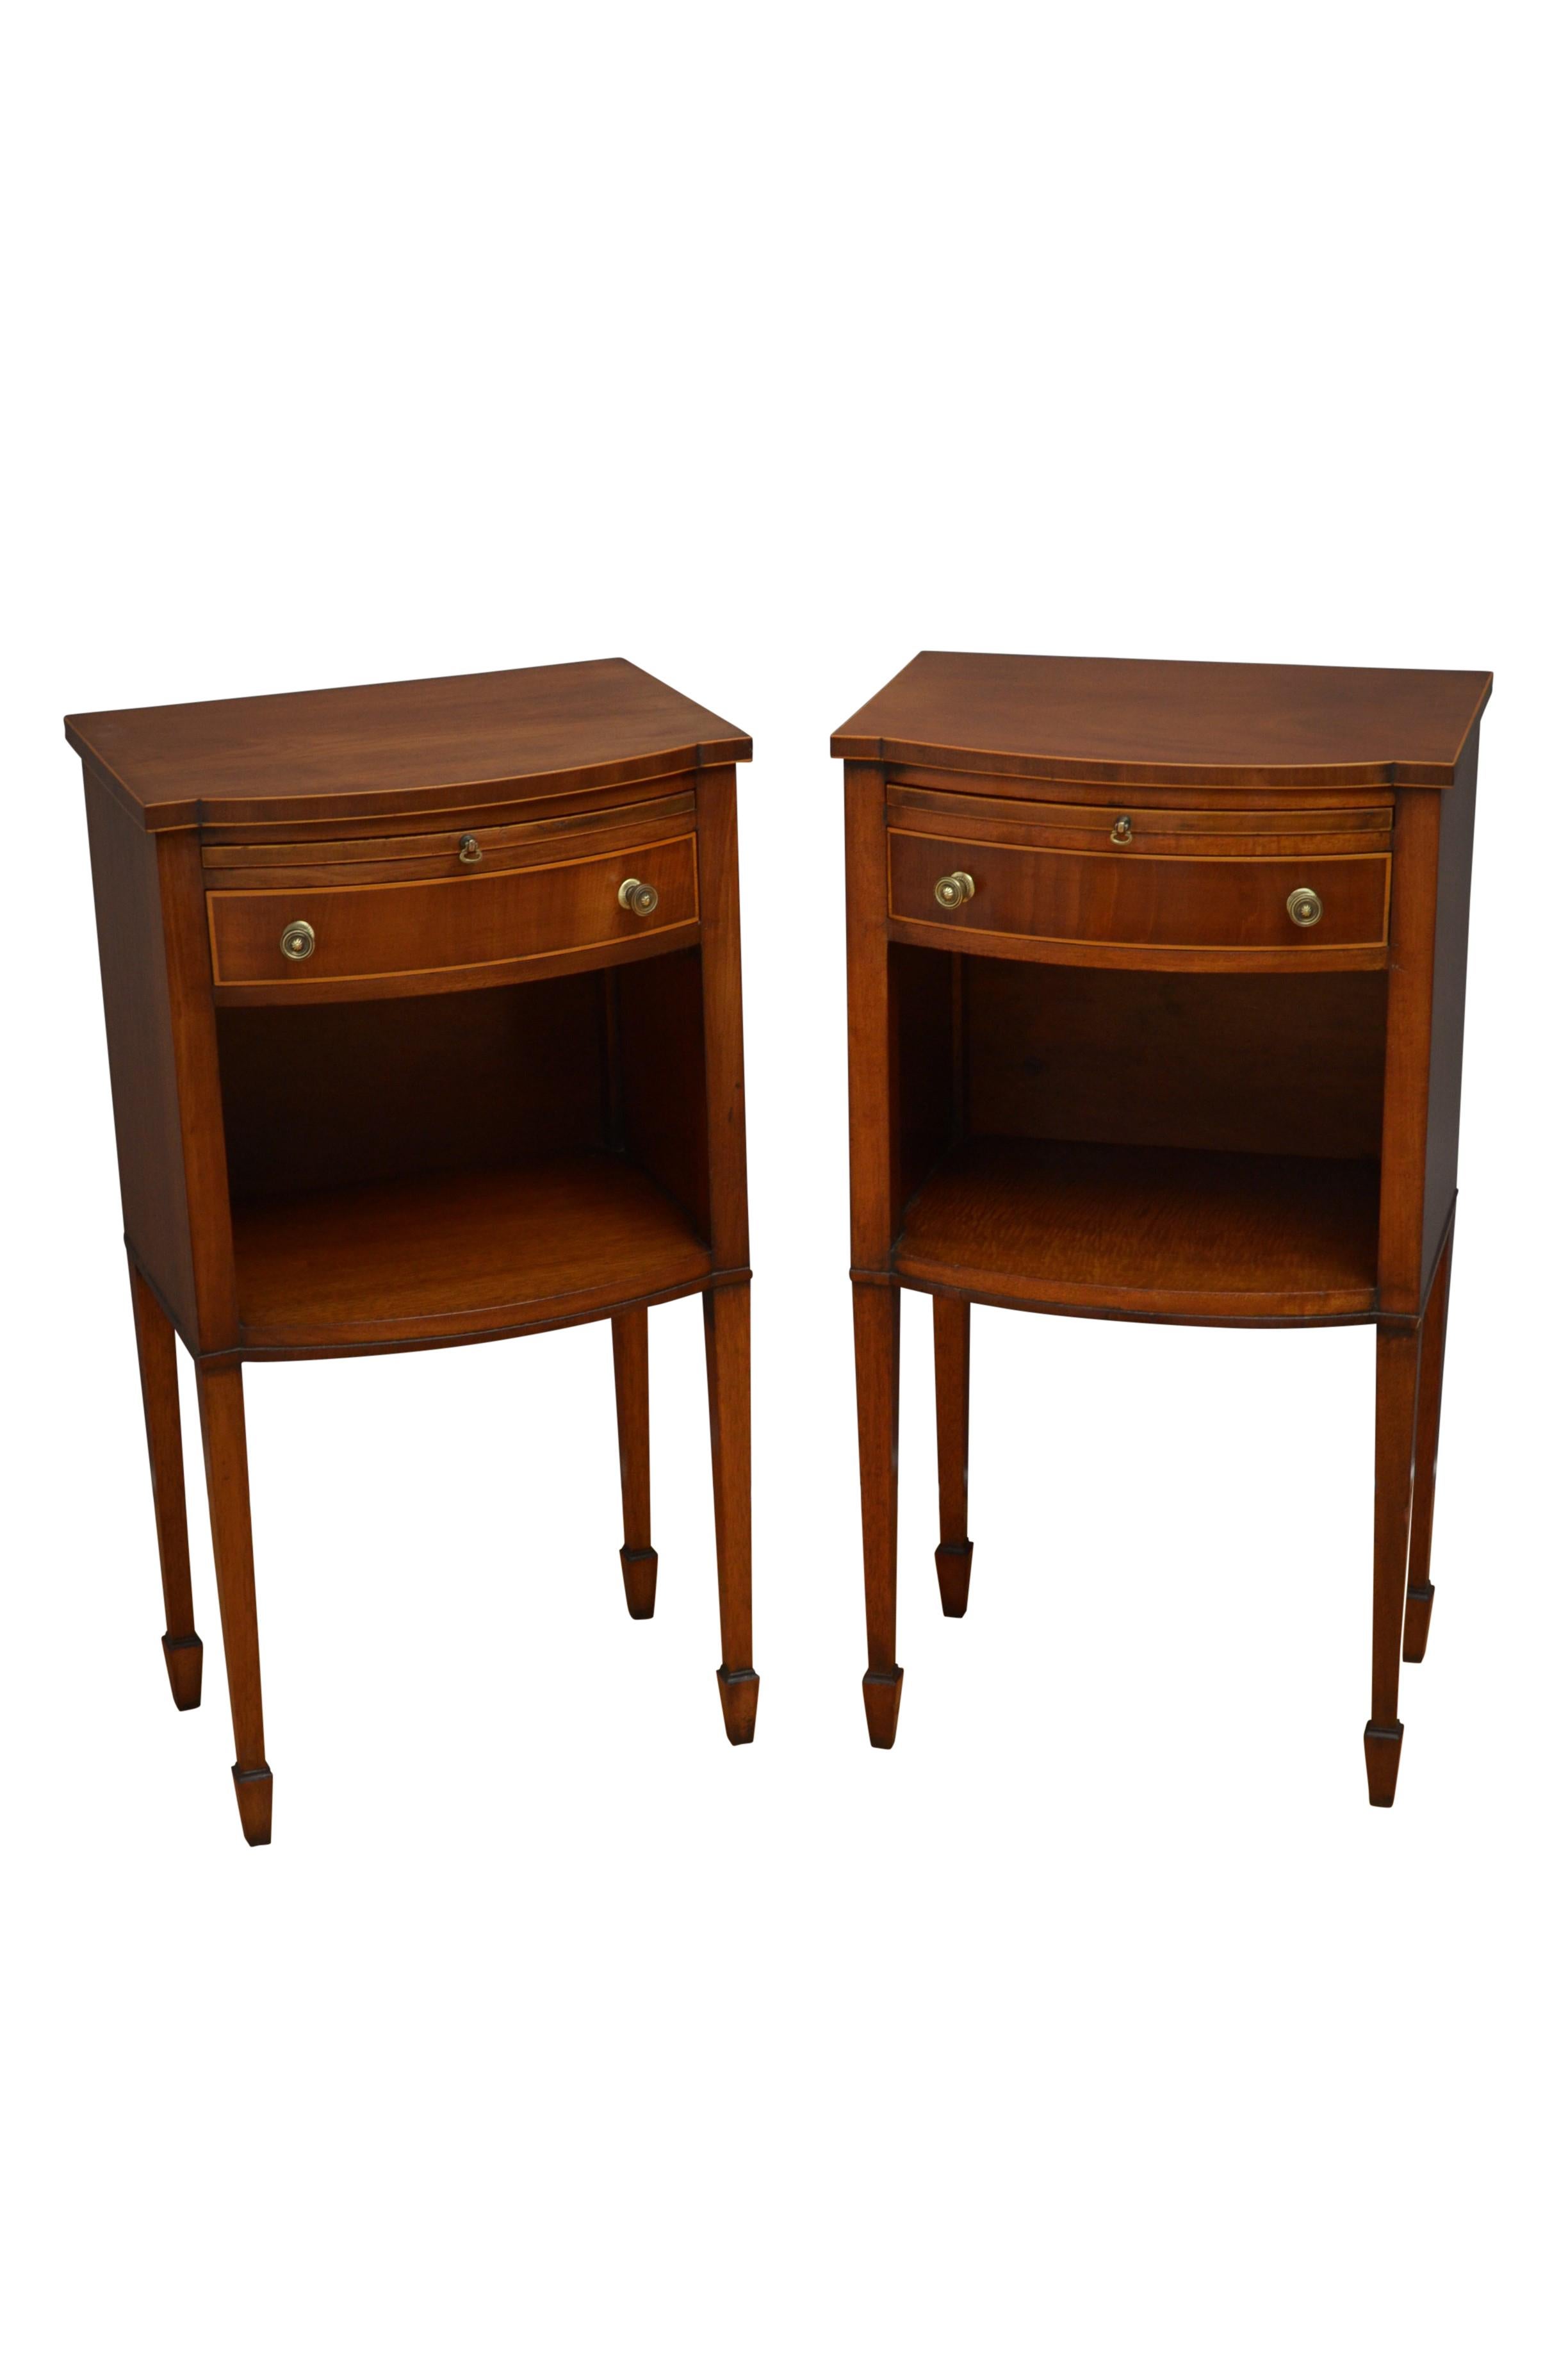 K0573 Antique pair of bedside cabinets, each cabinet having figured mahogany top above a slider, string inlaid drawer and open space, standing on slender , tapered legs terminating in spade feet. This antique pair of bedside cabinets is in home